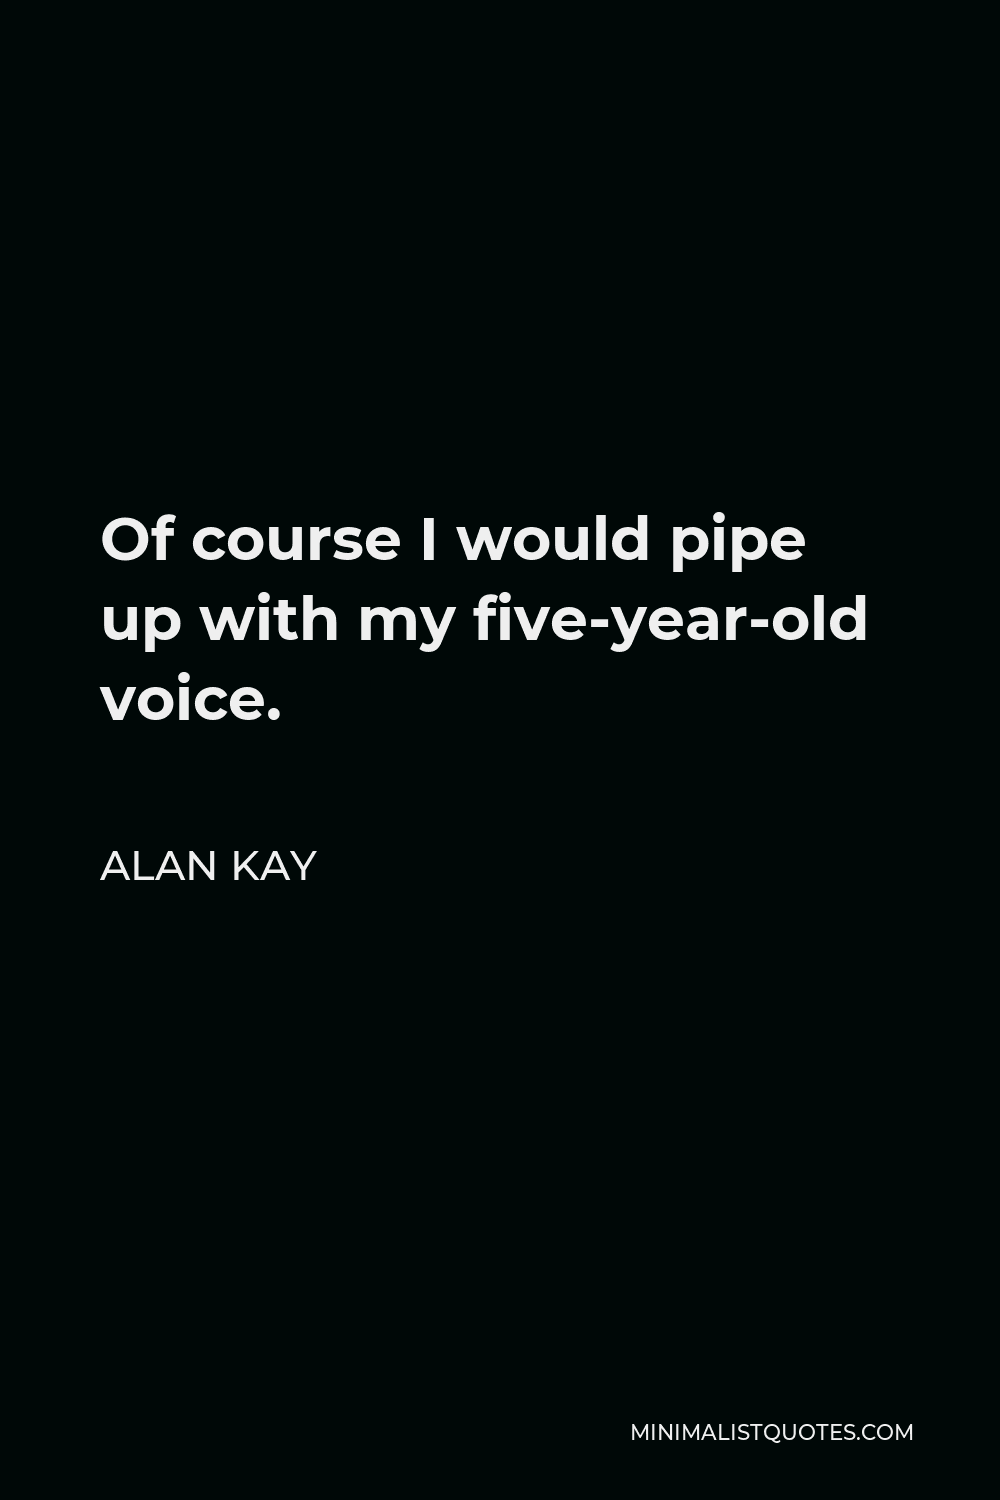 Alan Kay Quote - Of course I would pipe up with my five-year-old voice.